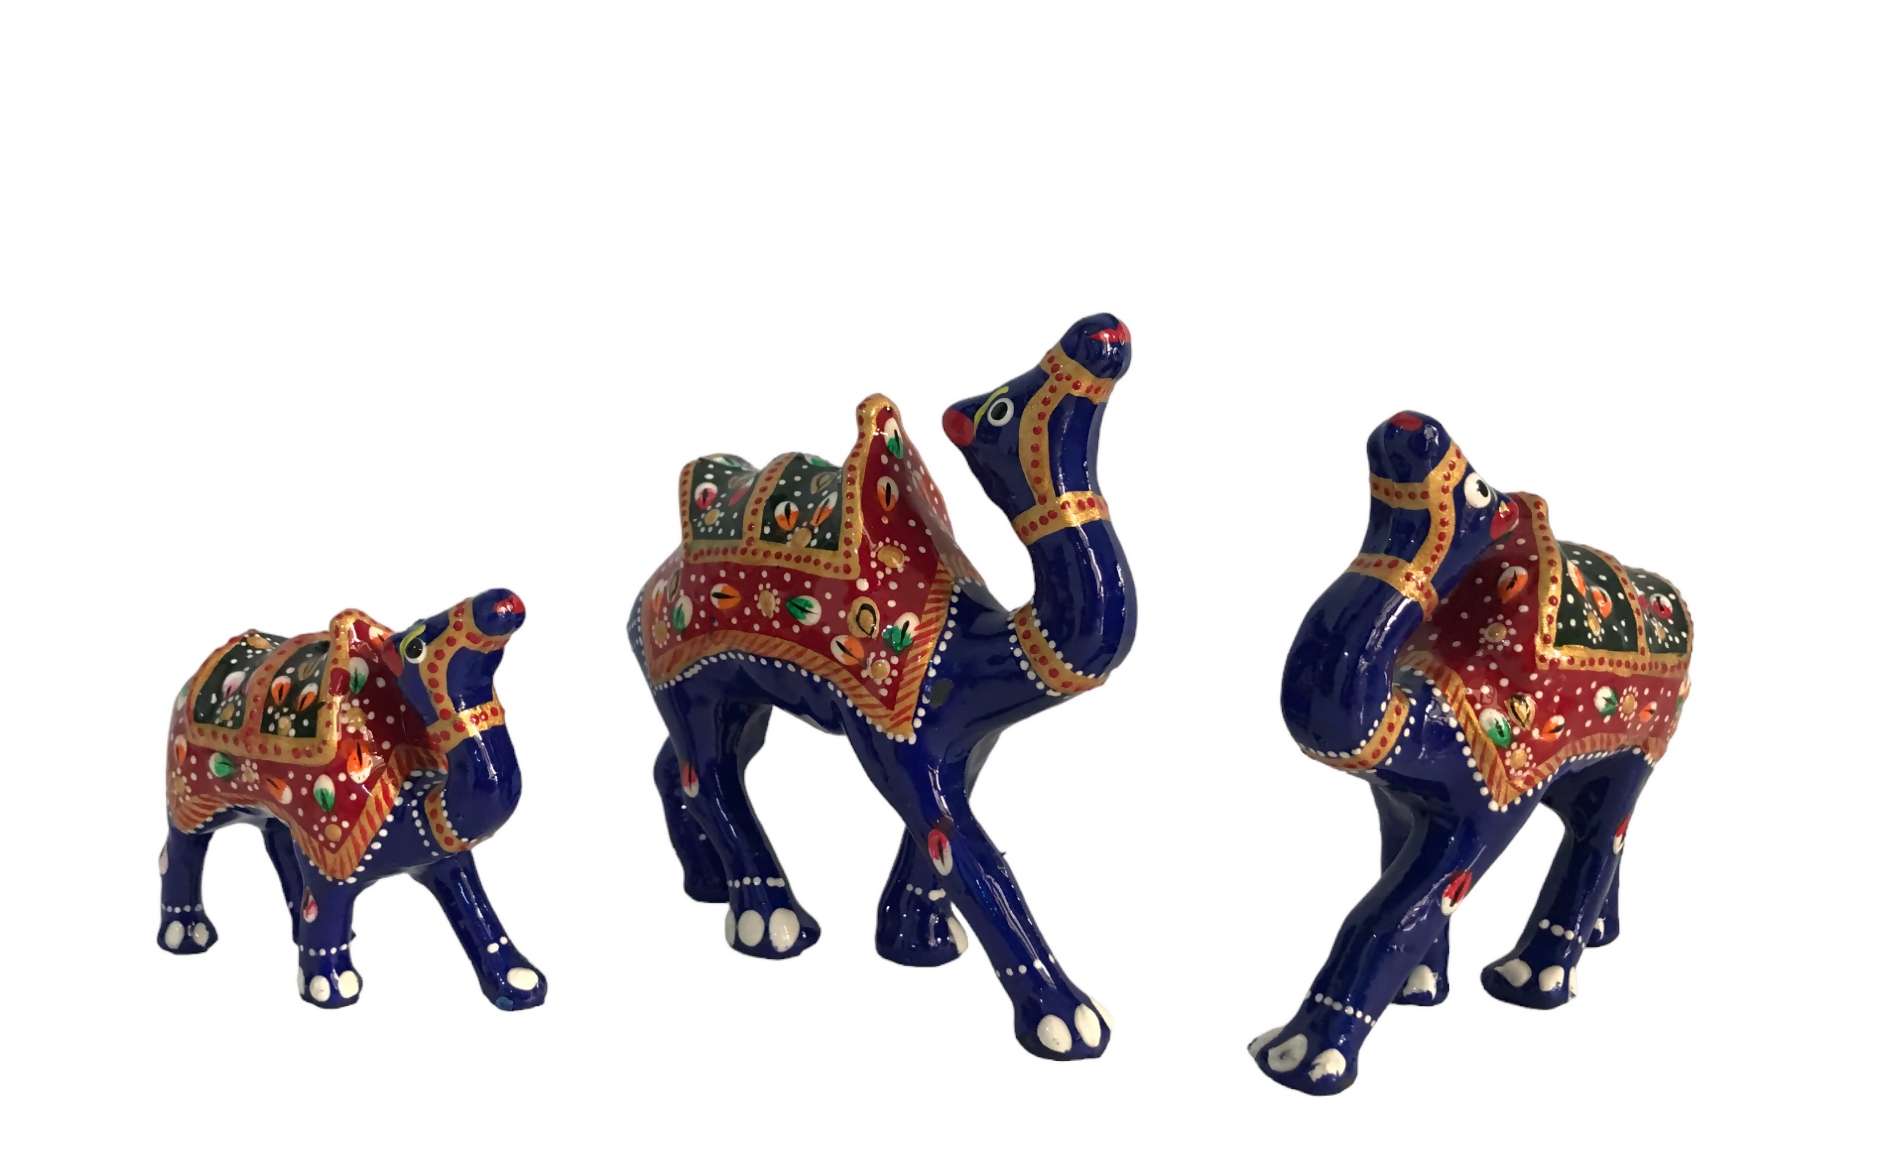 Wooden Decorative Camels with Meenakari - Blue